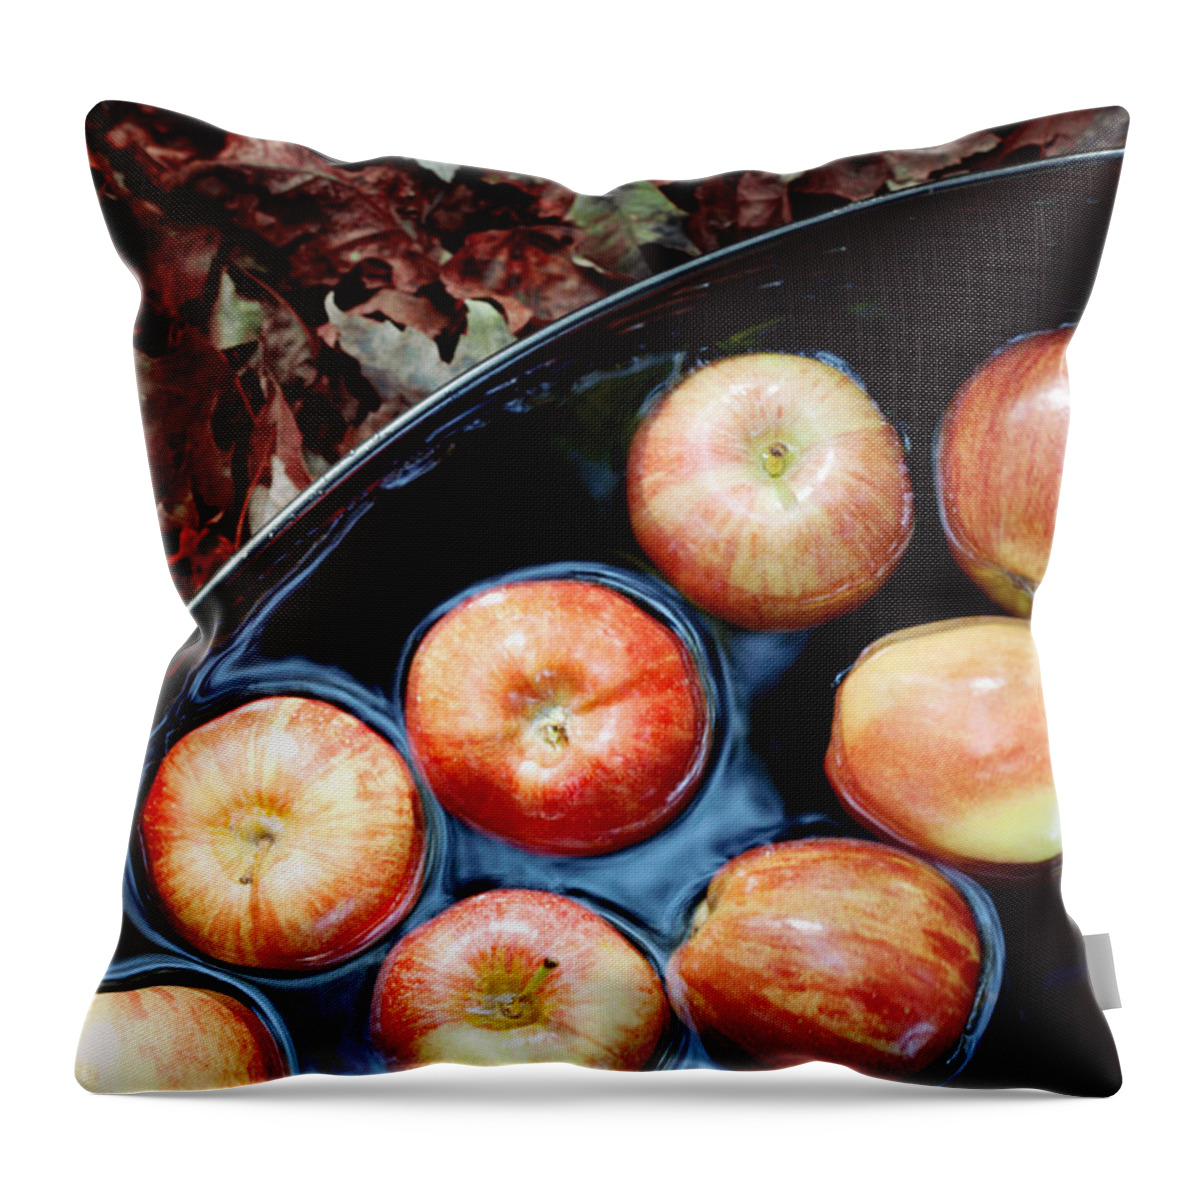 Apples Throw Pillow featuring the photograph Bobbing For Apples by Kim Fearheiley